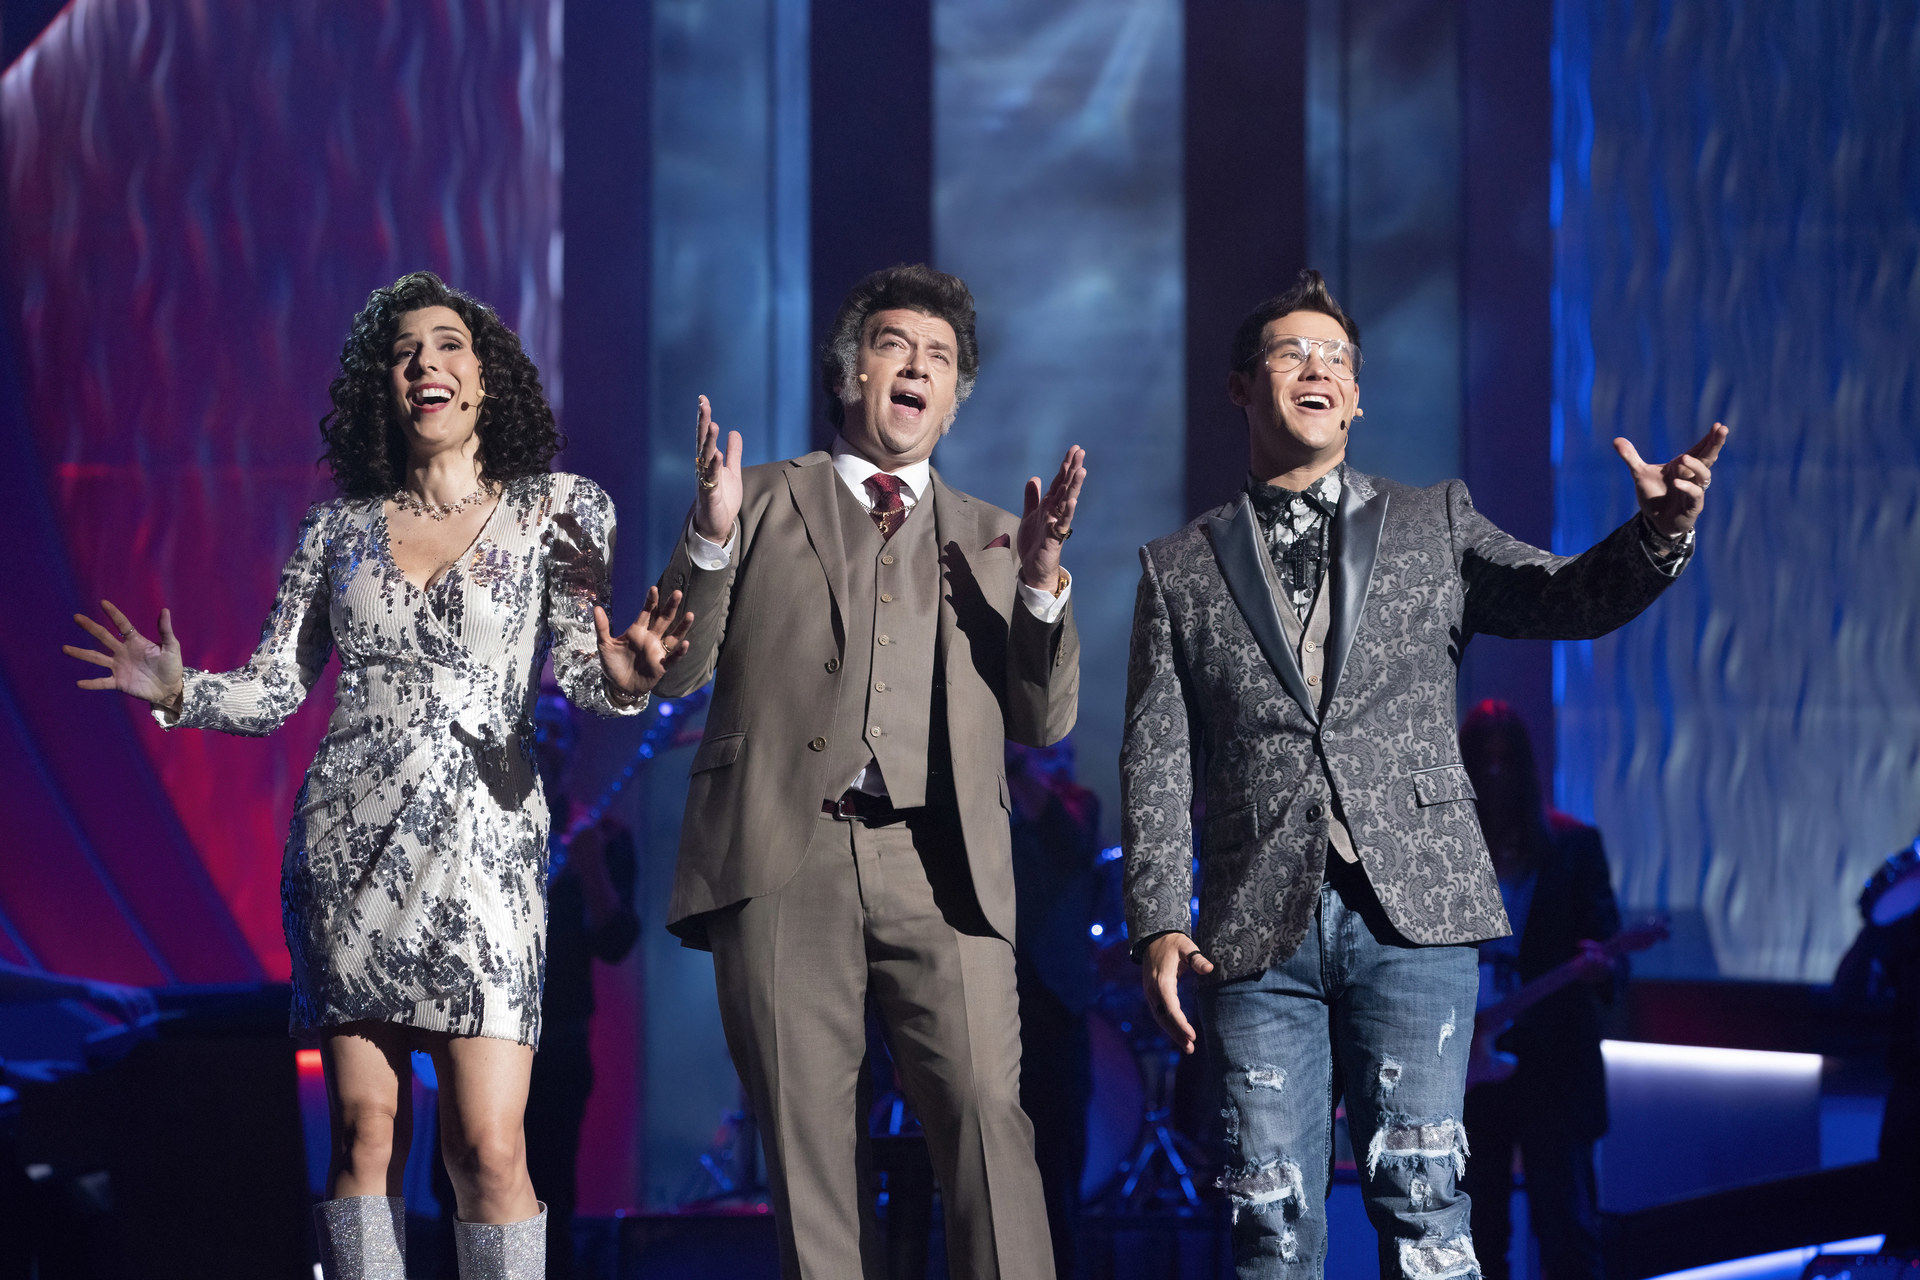 Three adult children sing on stage at church in the TV show Righteous Gemstones.